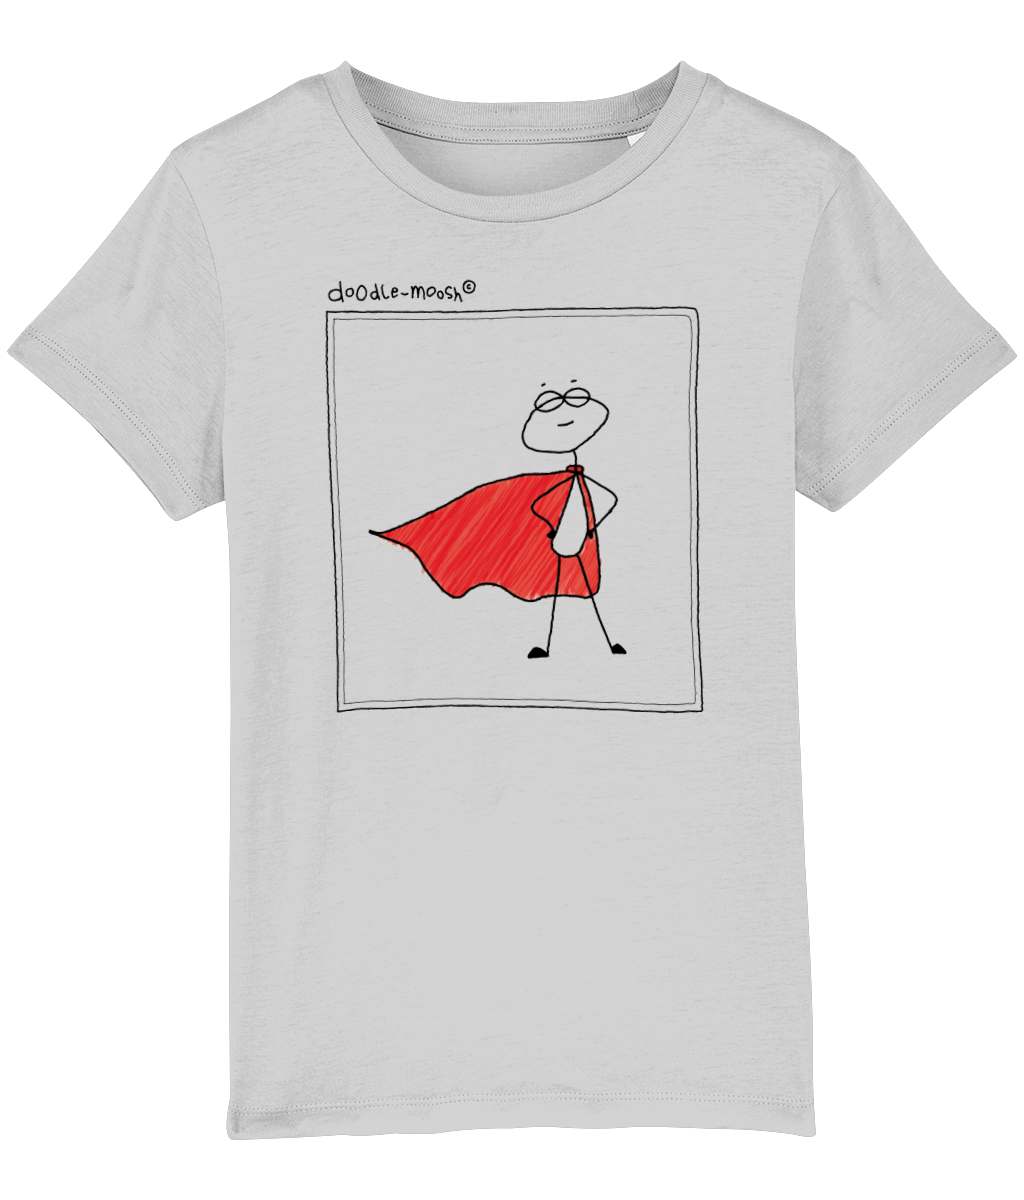 superpower t-shirt, grey with black, colorful drawing